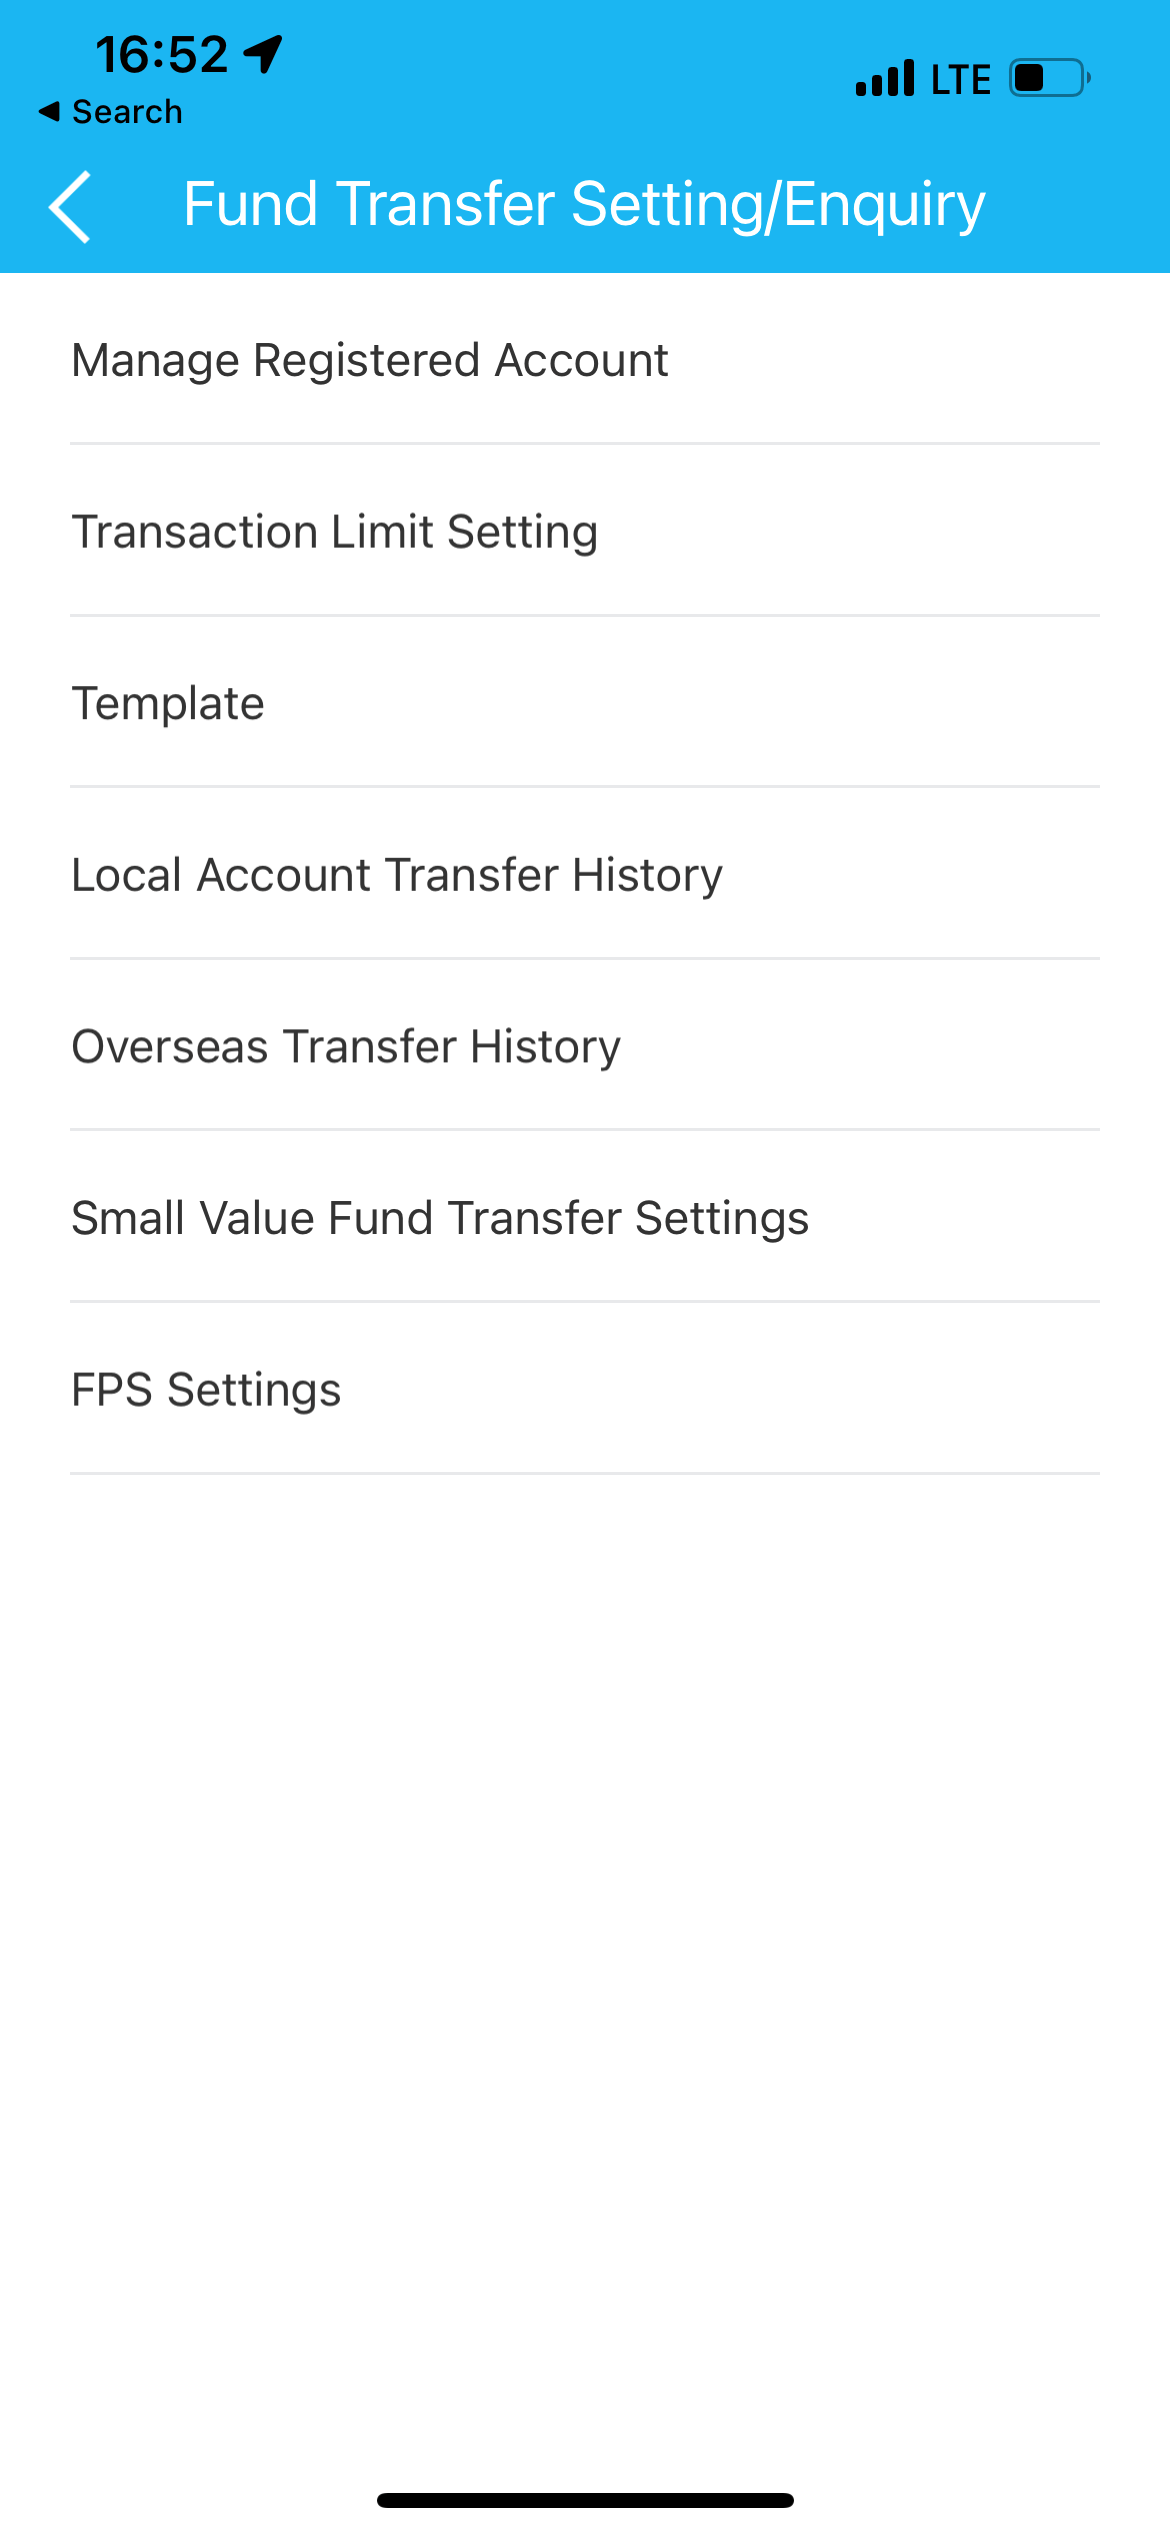 step 2, select 'small-value fund transfer settings' to register small-value fund transfer service and set up the daily transfer limit.